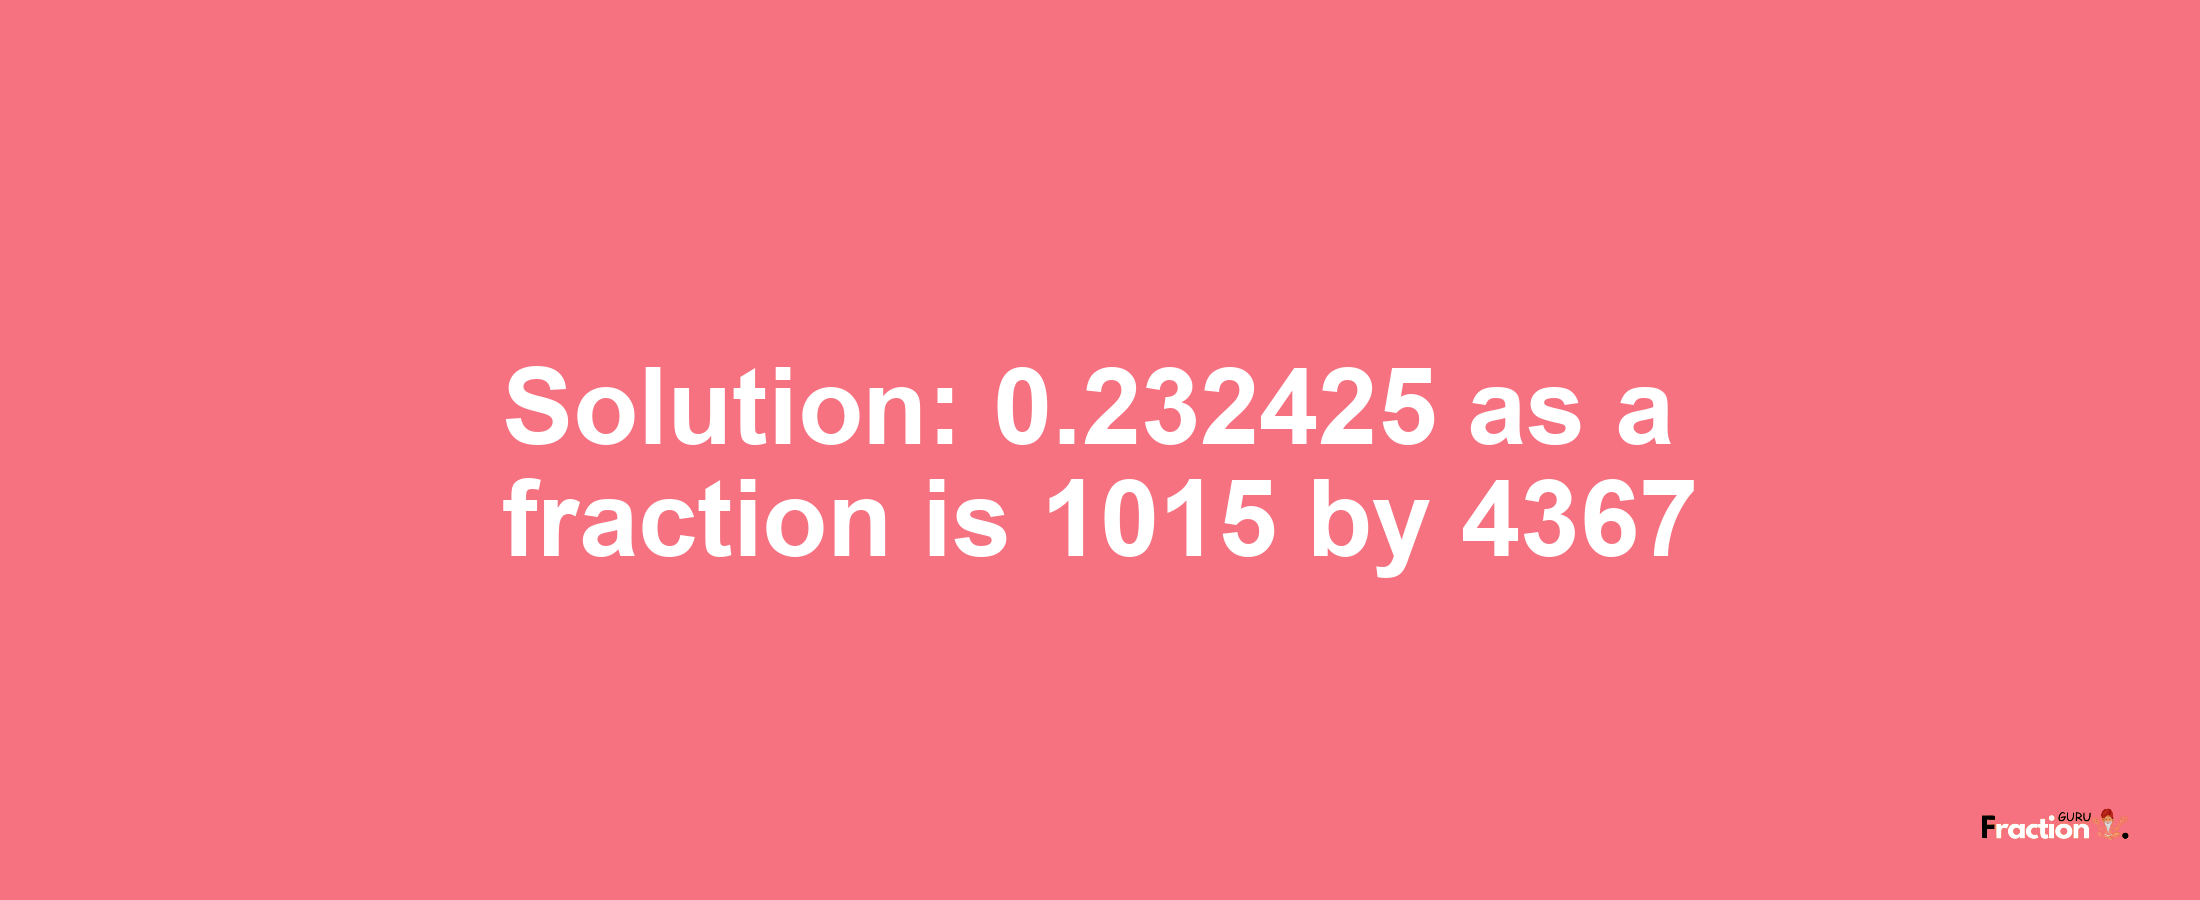 Solution:0.232425 as a fraction is 1015/4367